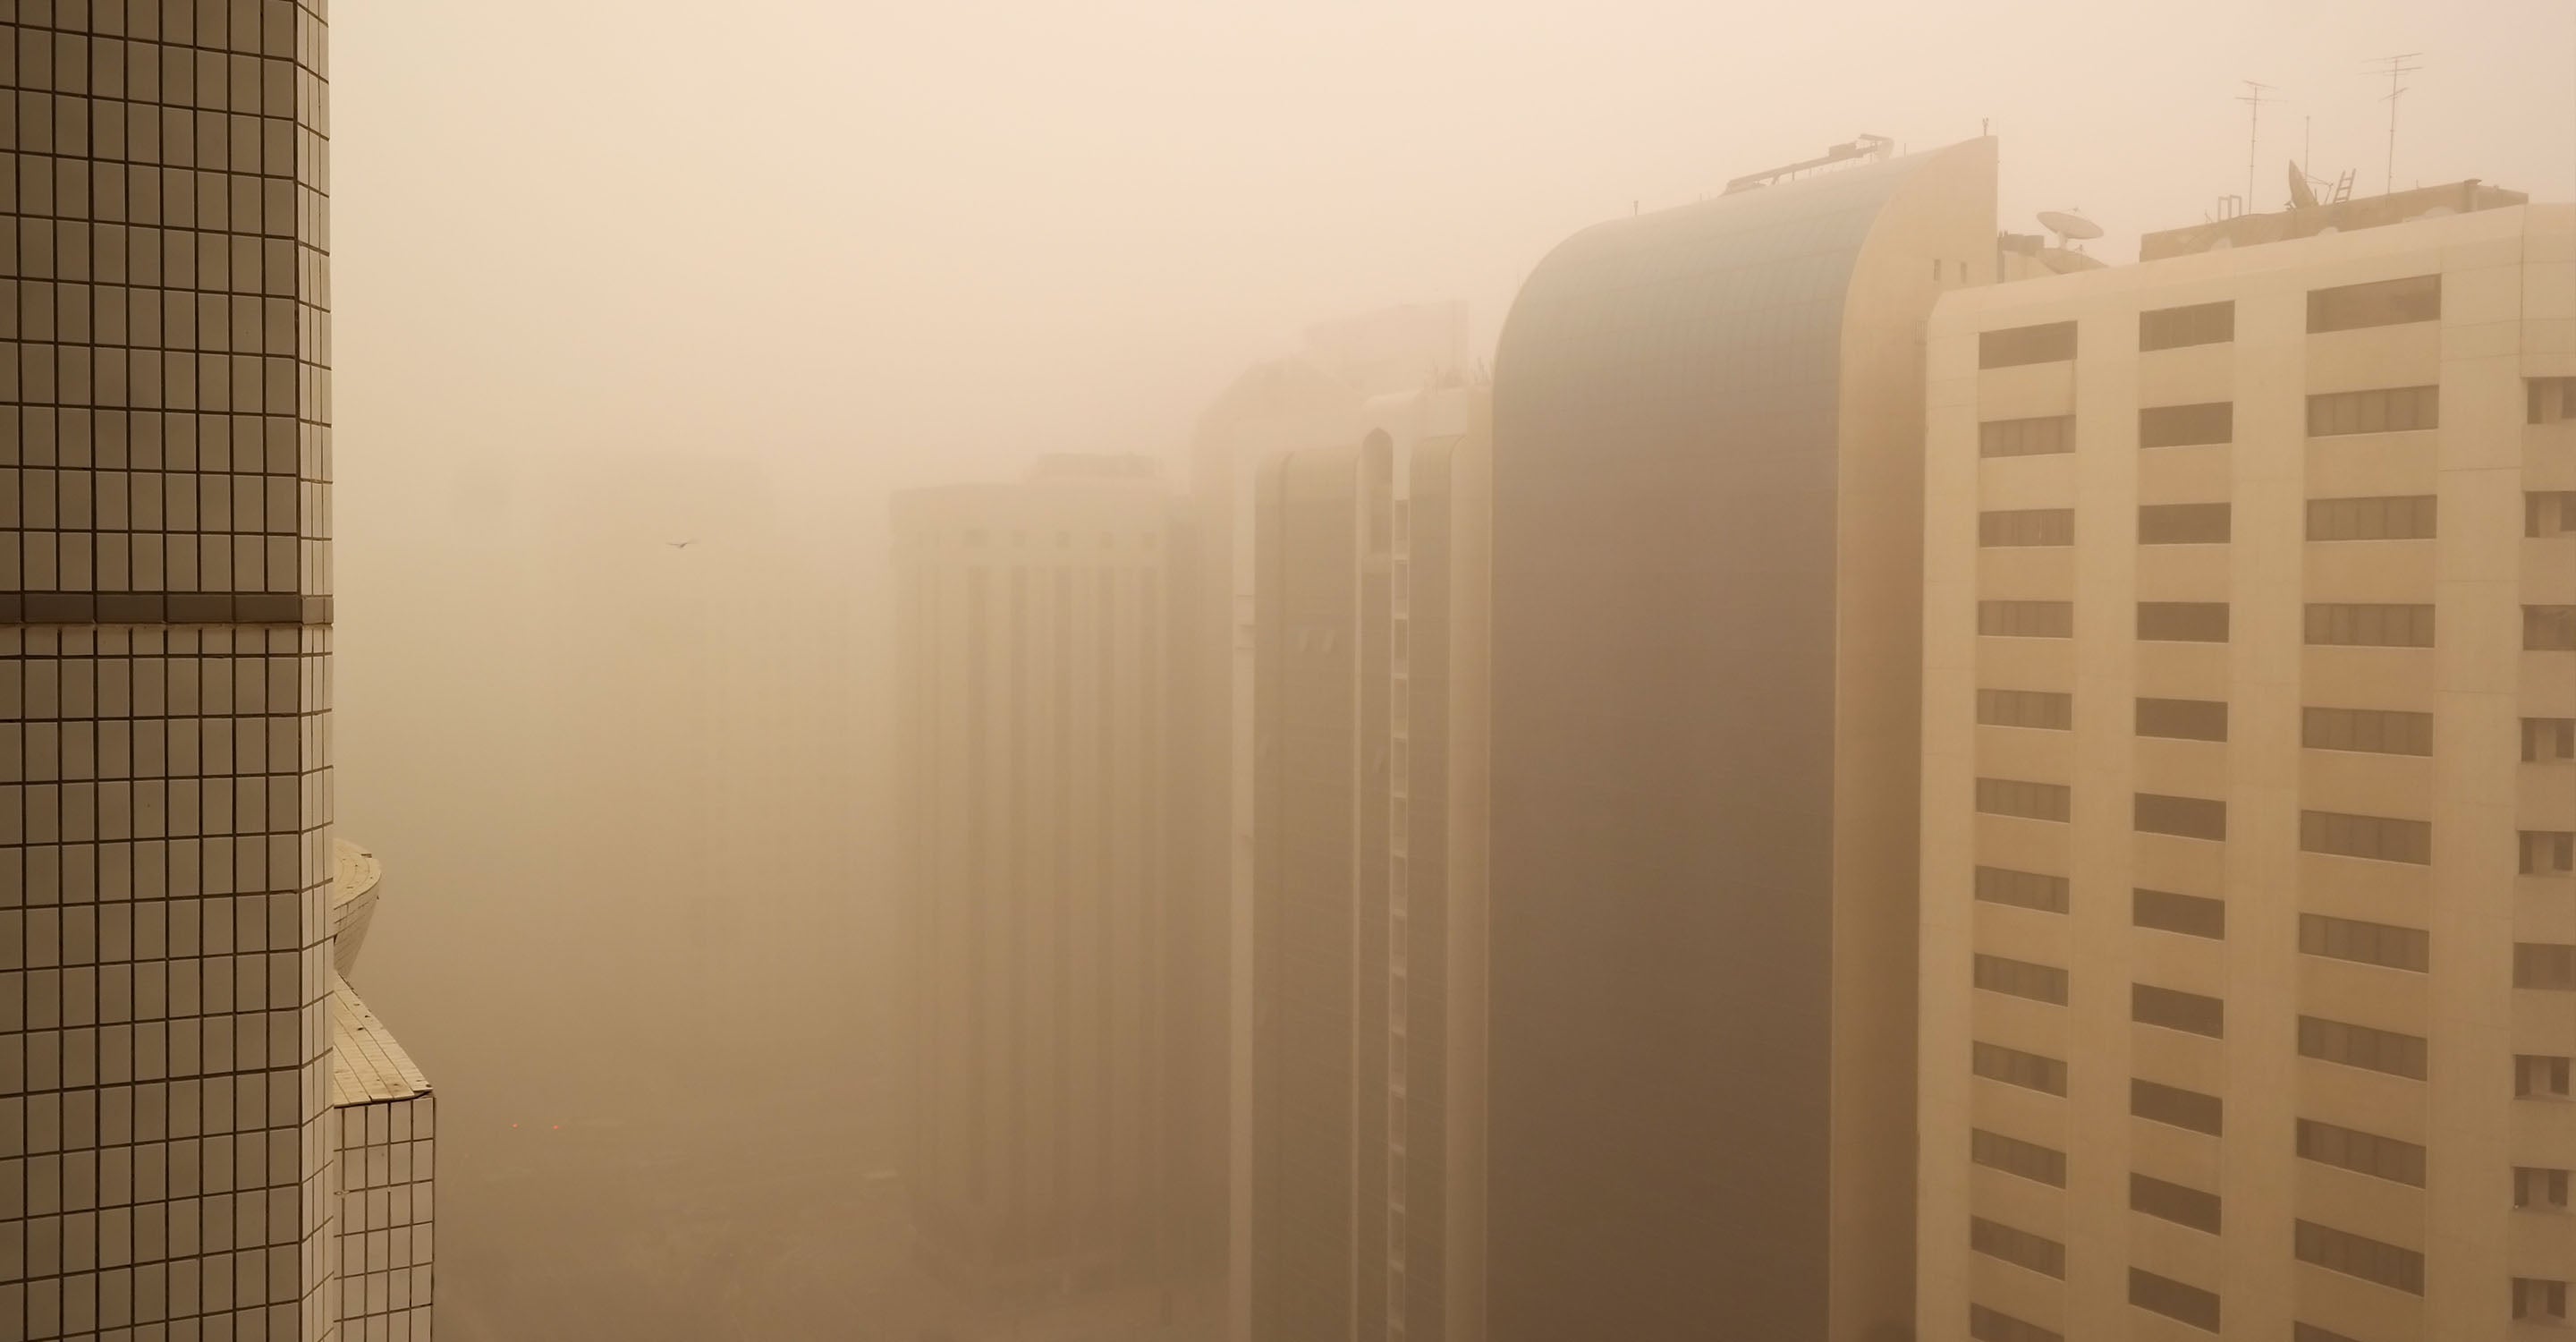 The thumbnail of a news article titled How dust storms affect air quality